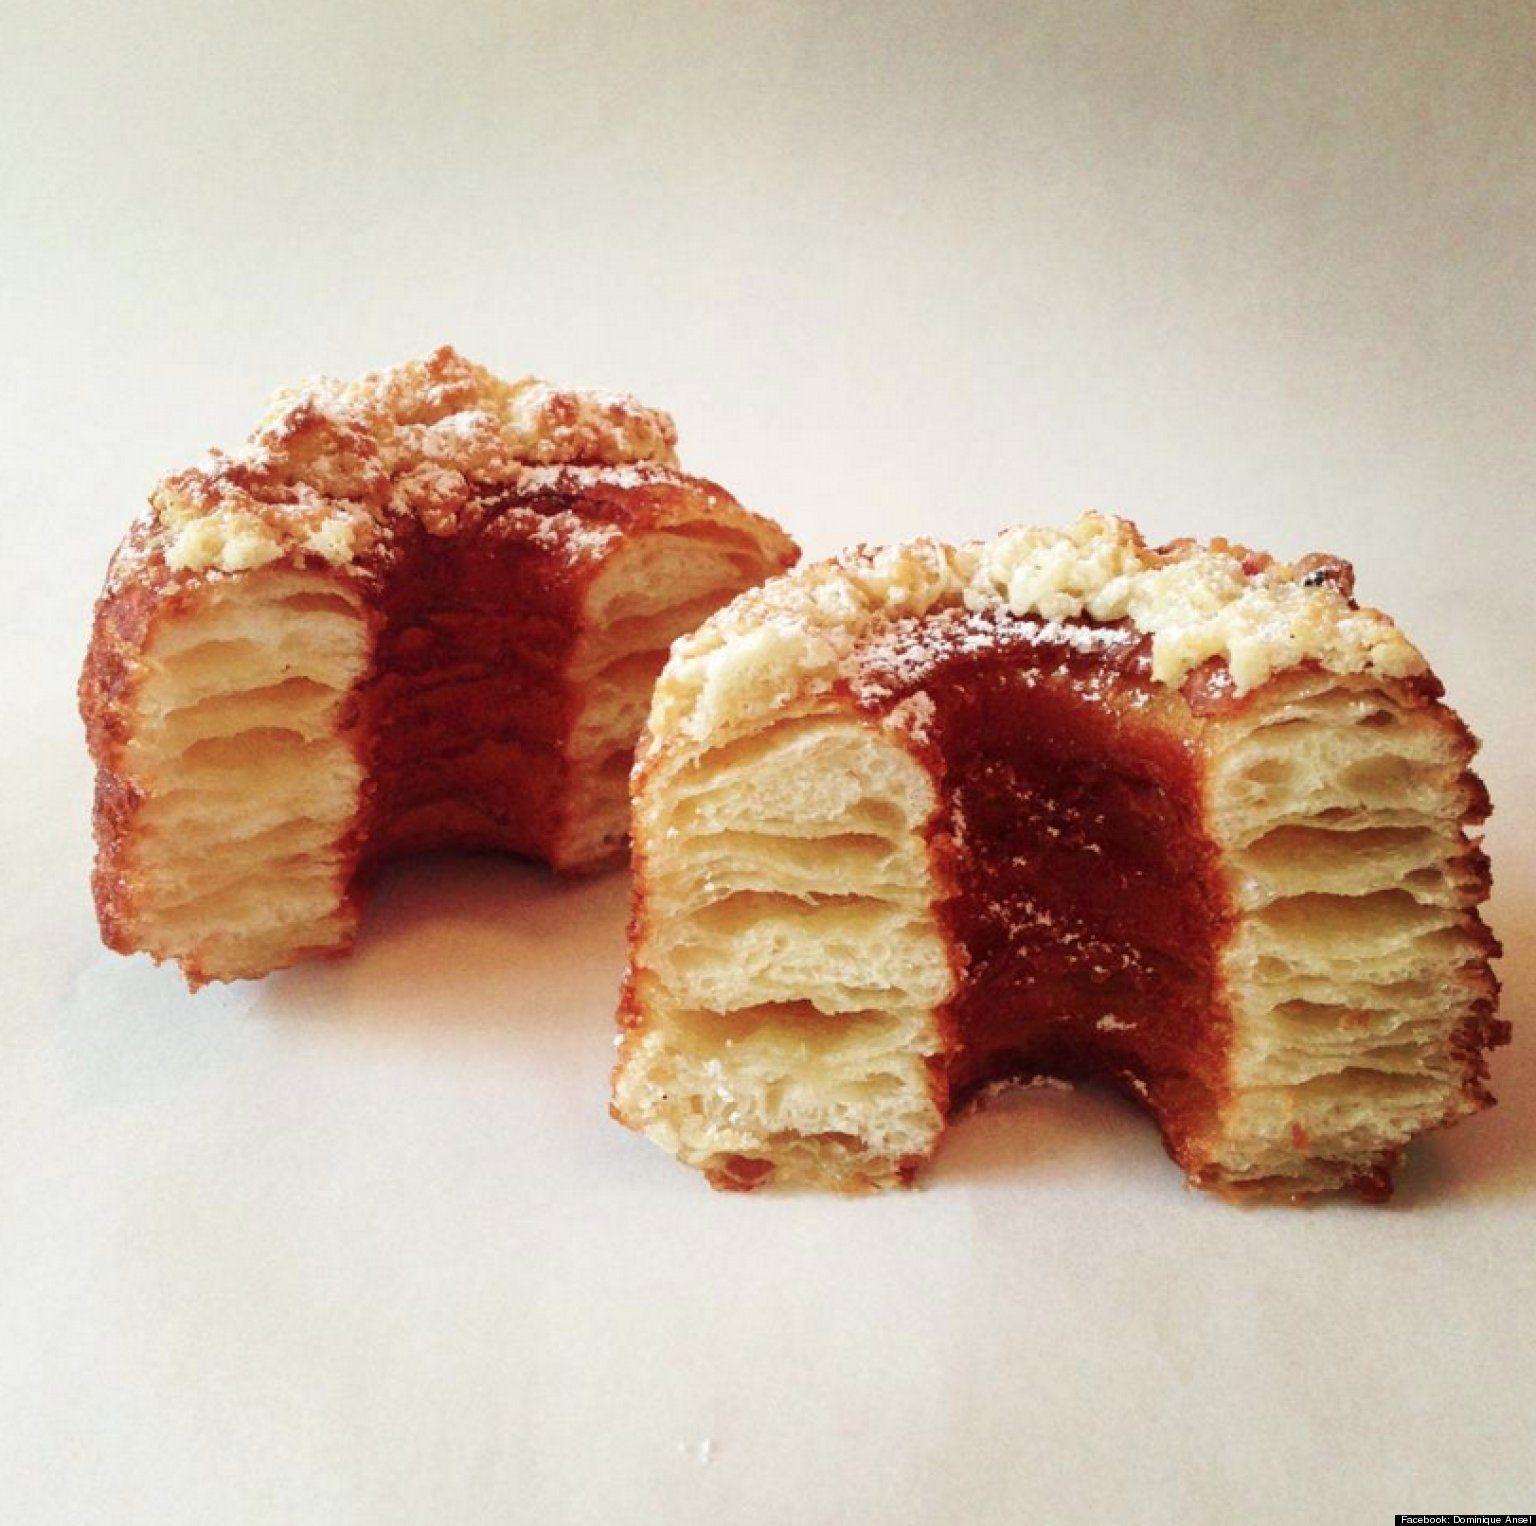 Cronut Fever Taking New York (And The Country) By Storm ~ The “cronut” is a donu